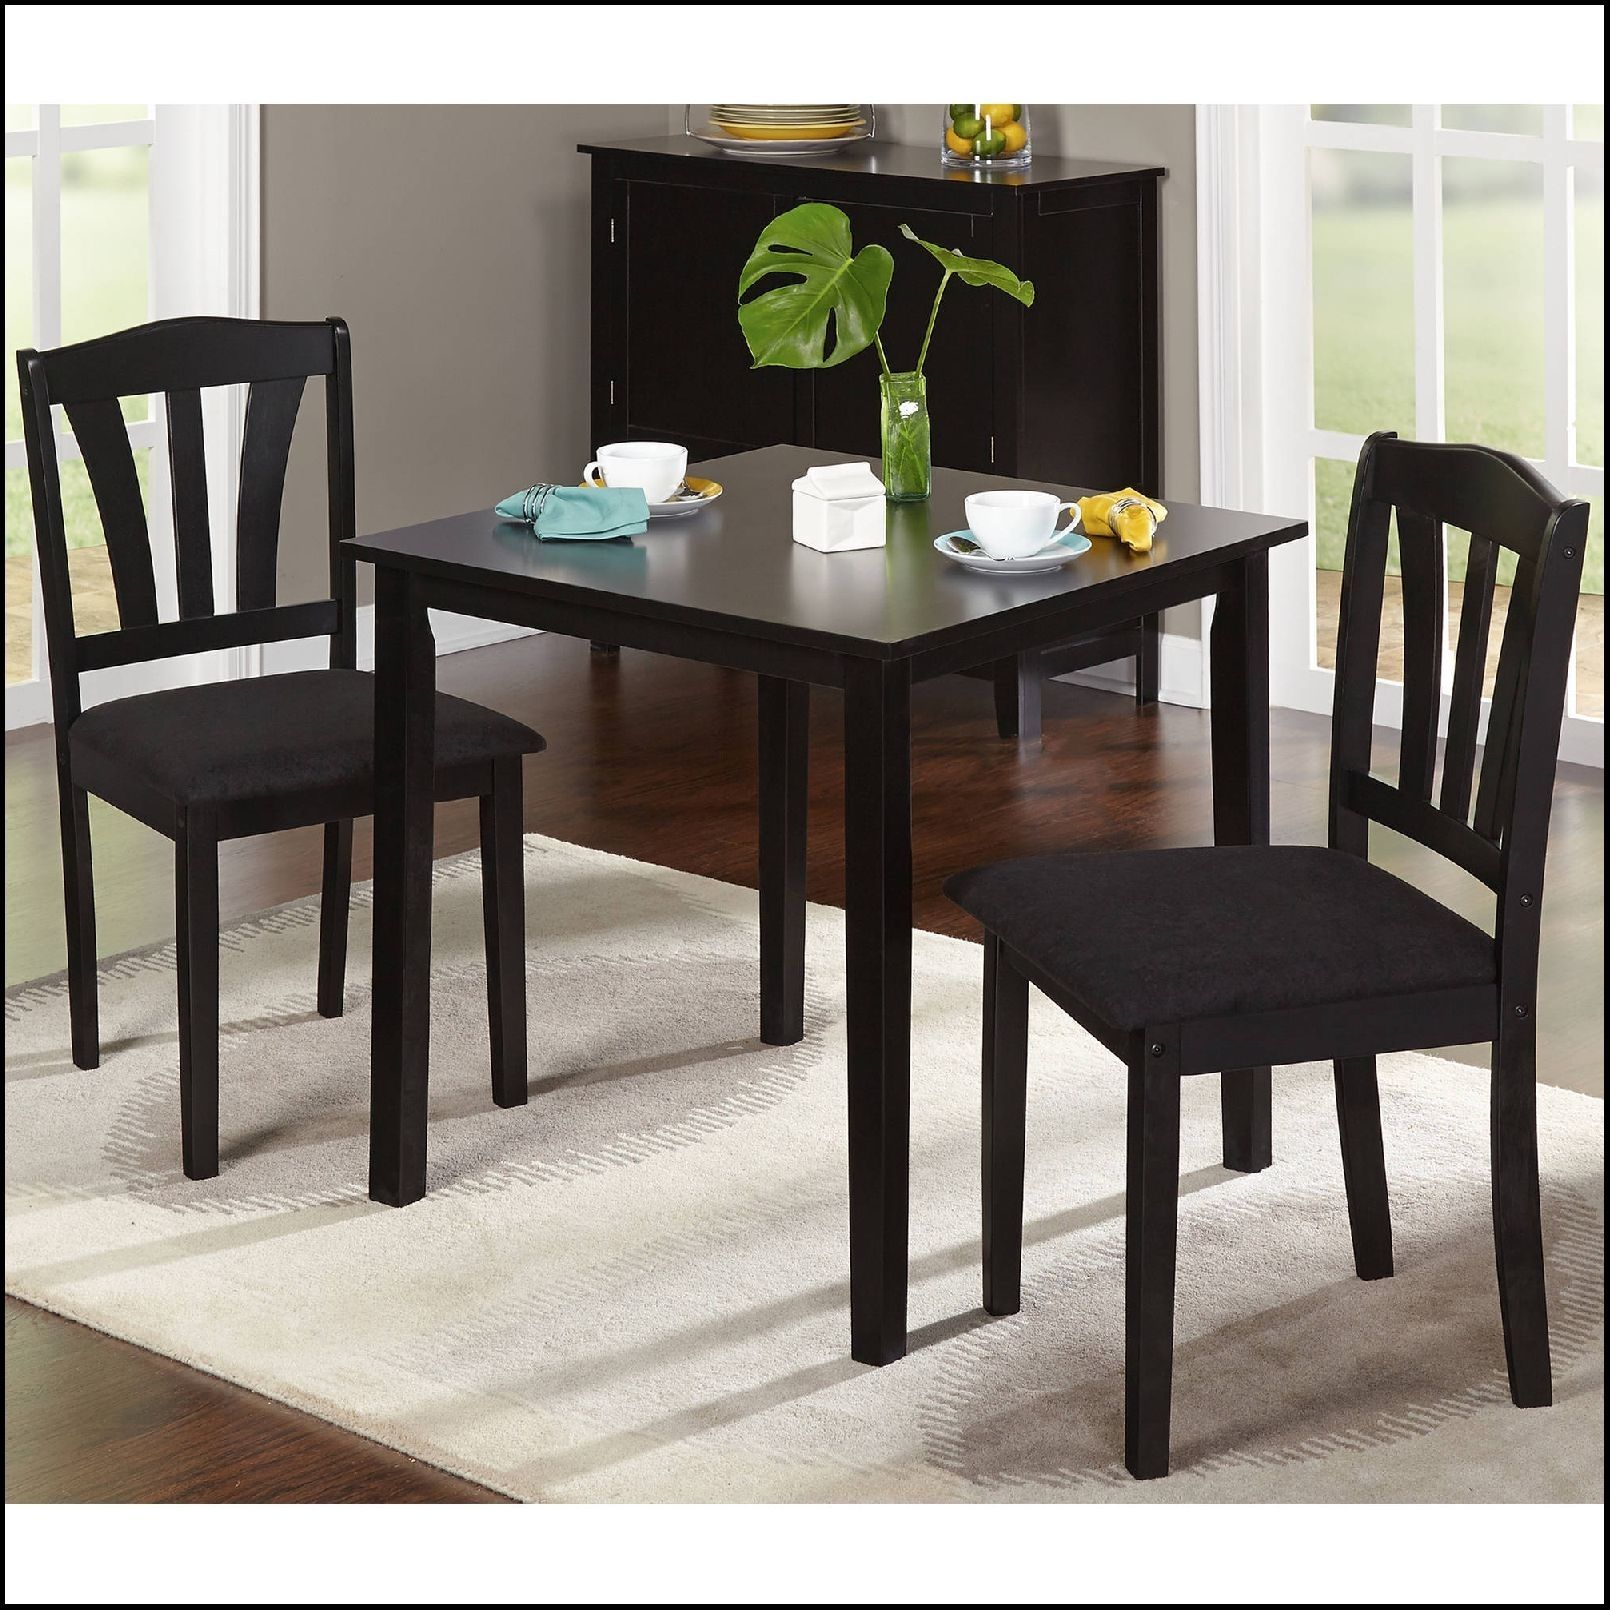 Sitiwhitegroook | Home Design Ideas For Recent Palazzo 3 Piece Dining Table Sets (View 11 of 20)